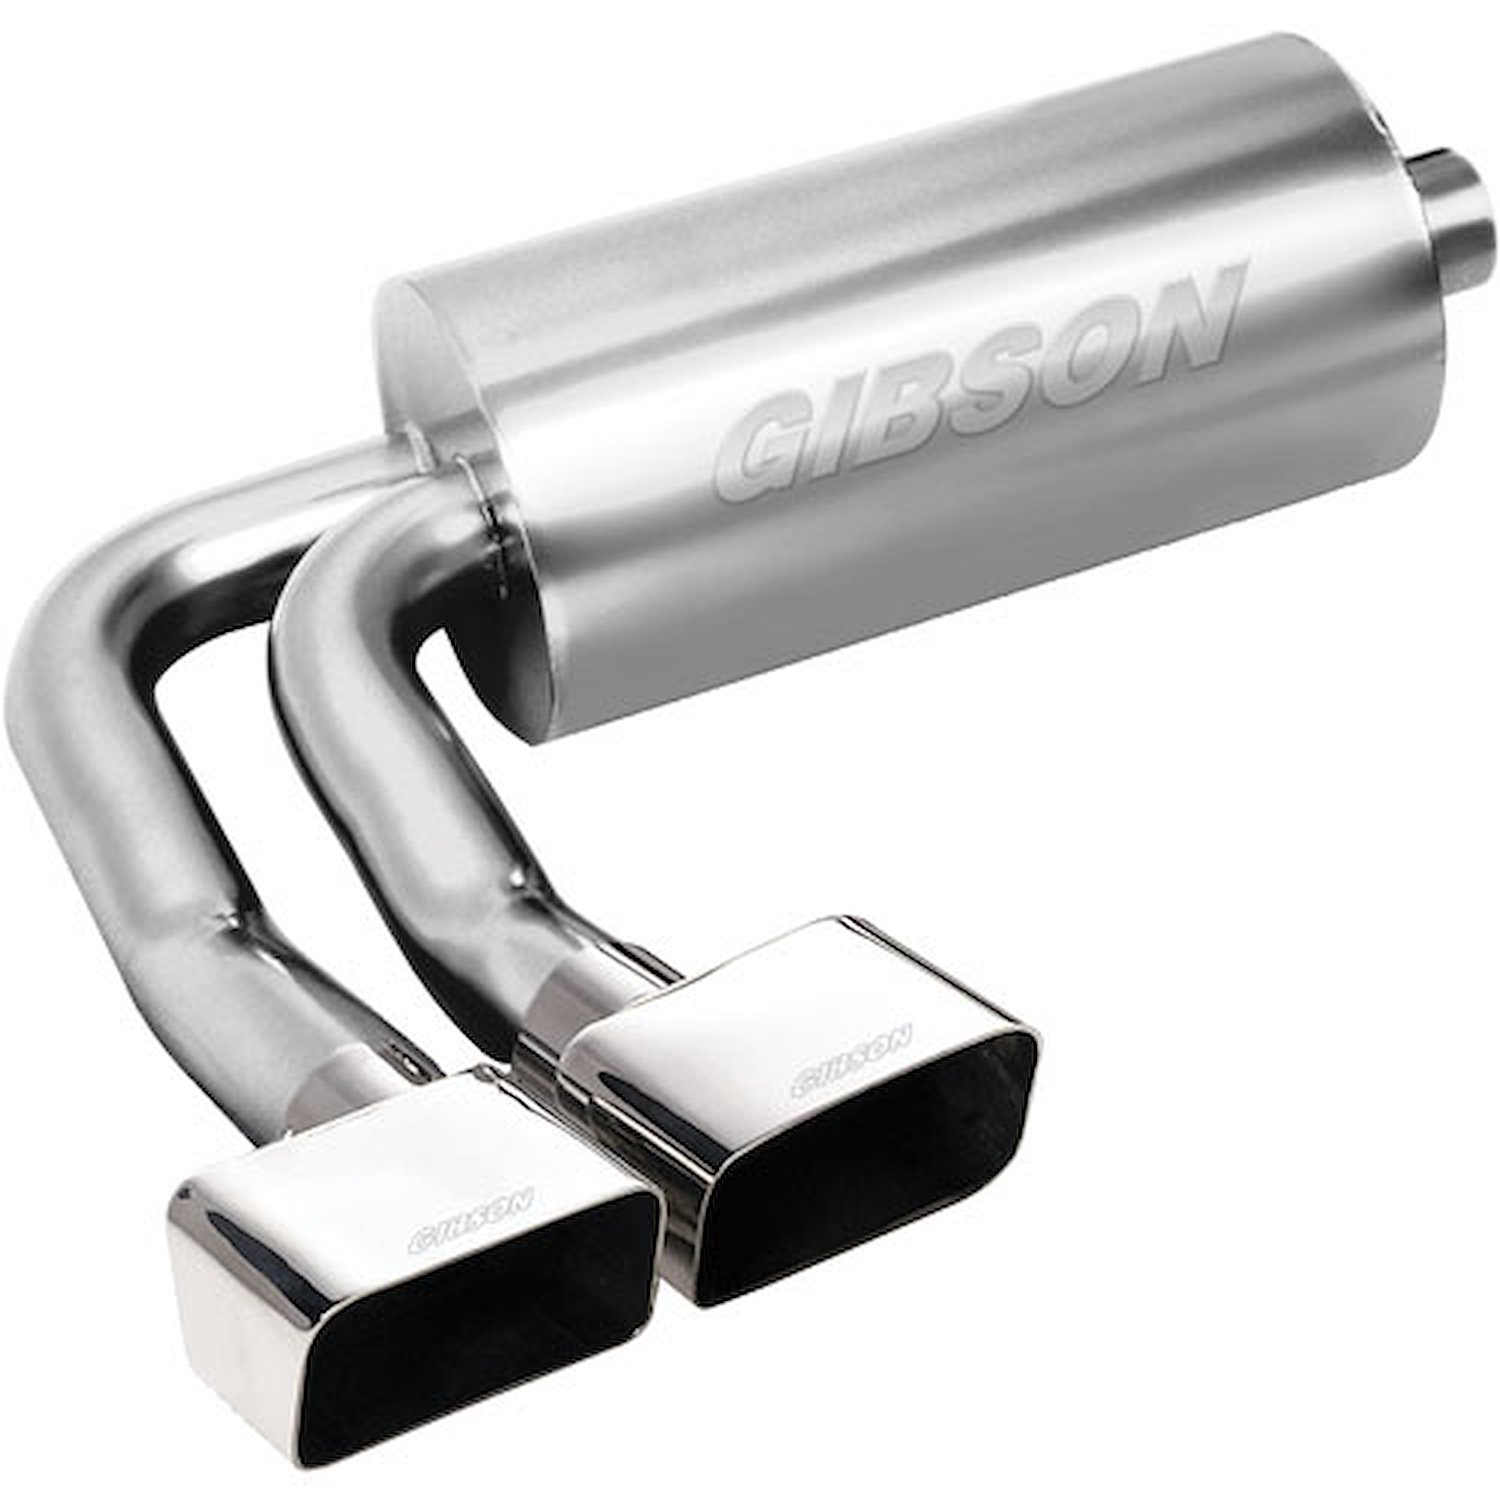 Super Truck Stainless Steel Cat-Back Exhaust 1988-93 GM C/K Series 1500 Truck 2WD/4WD 5.7L